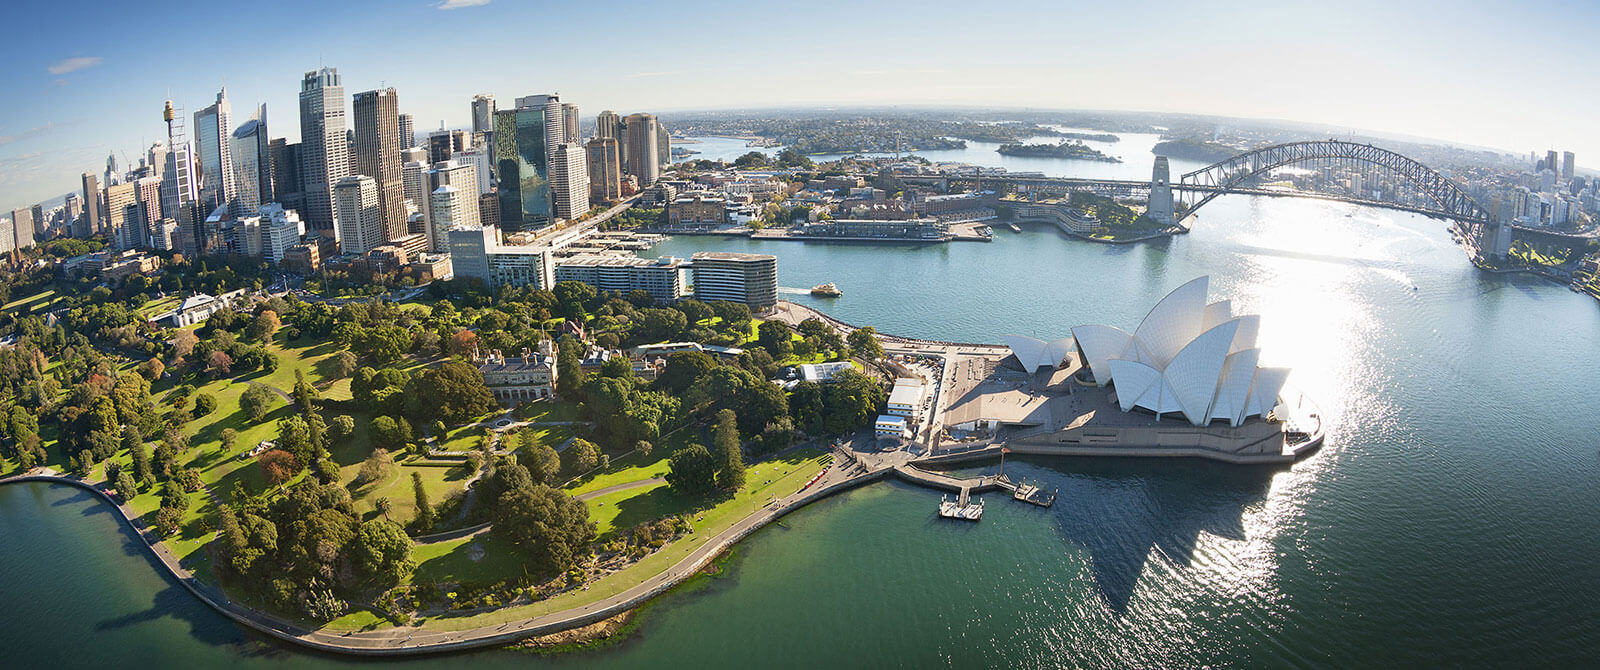 Aerial Over Sydney Harbour - Book Your Australia Vacation - Australia Travel Agency